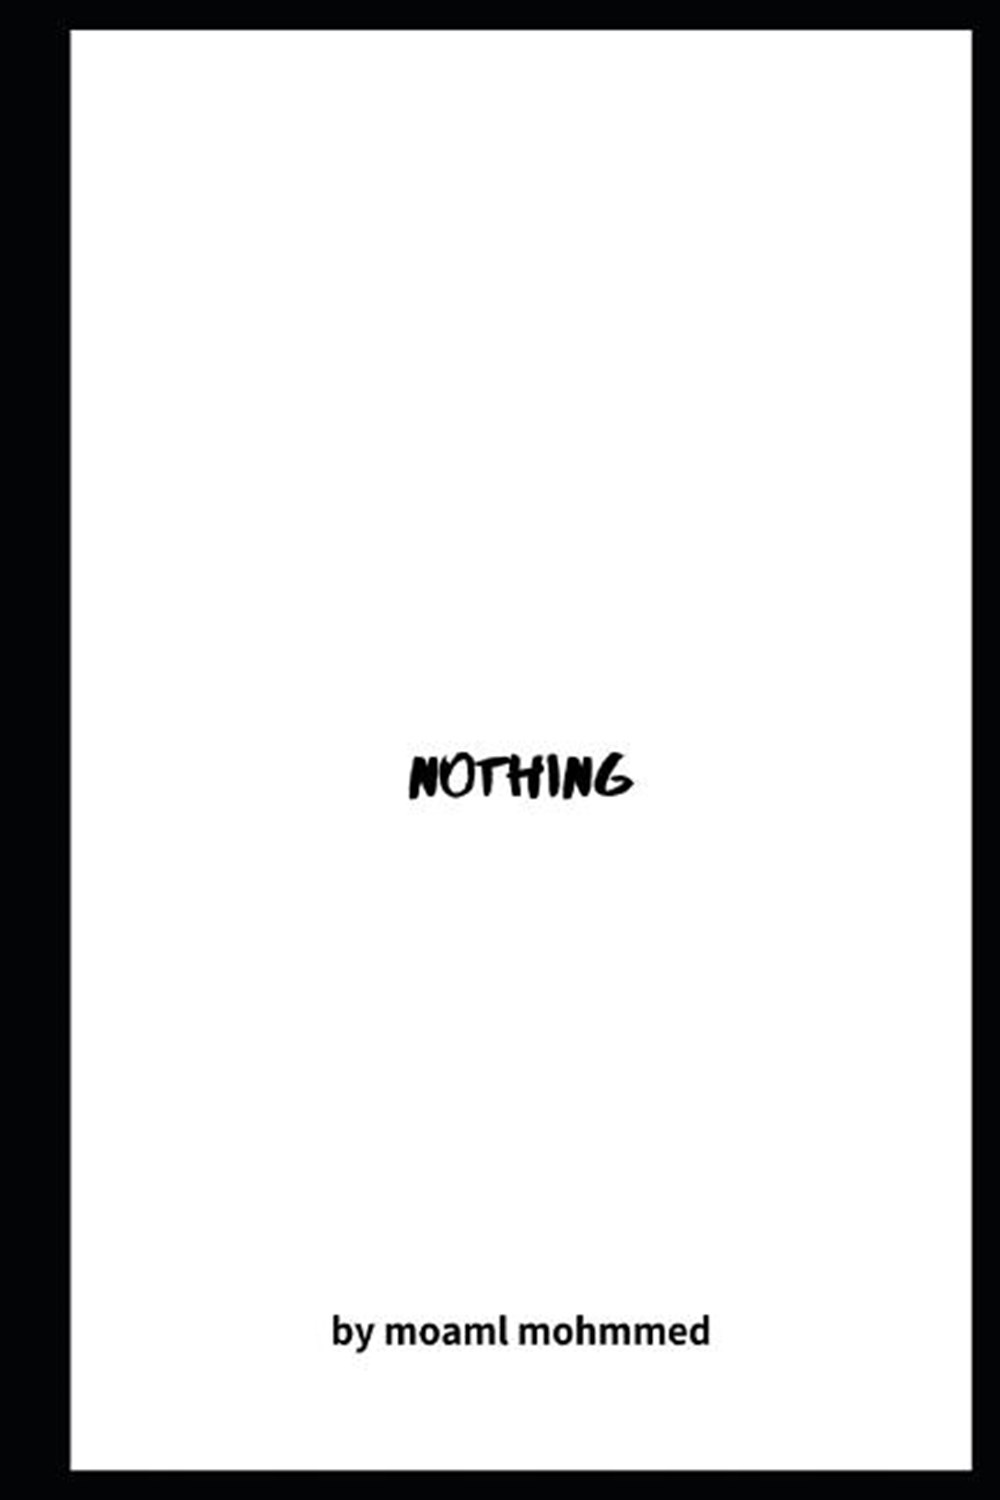 nothing: What is nothing? Specifically